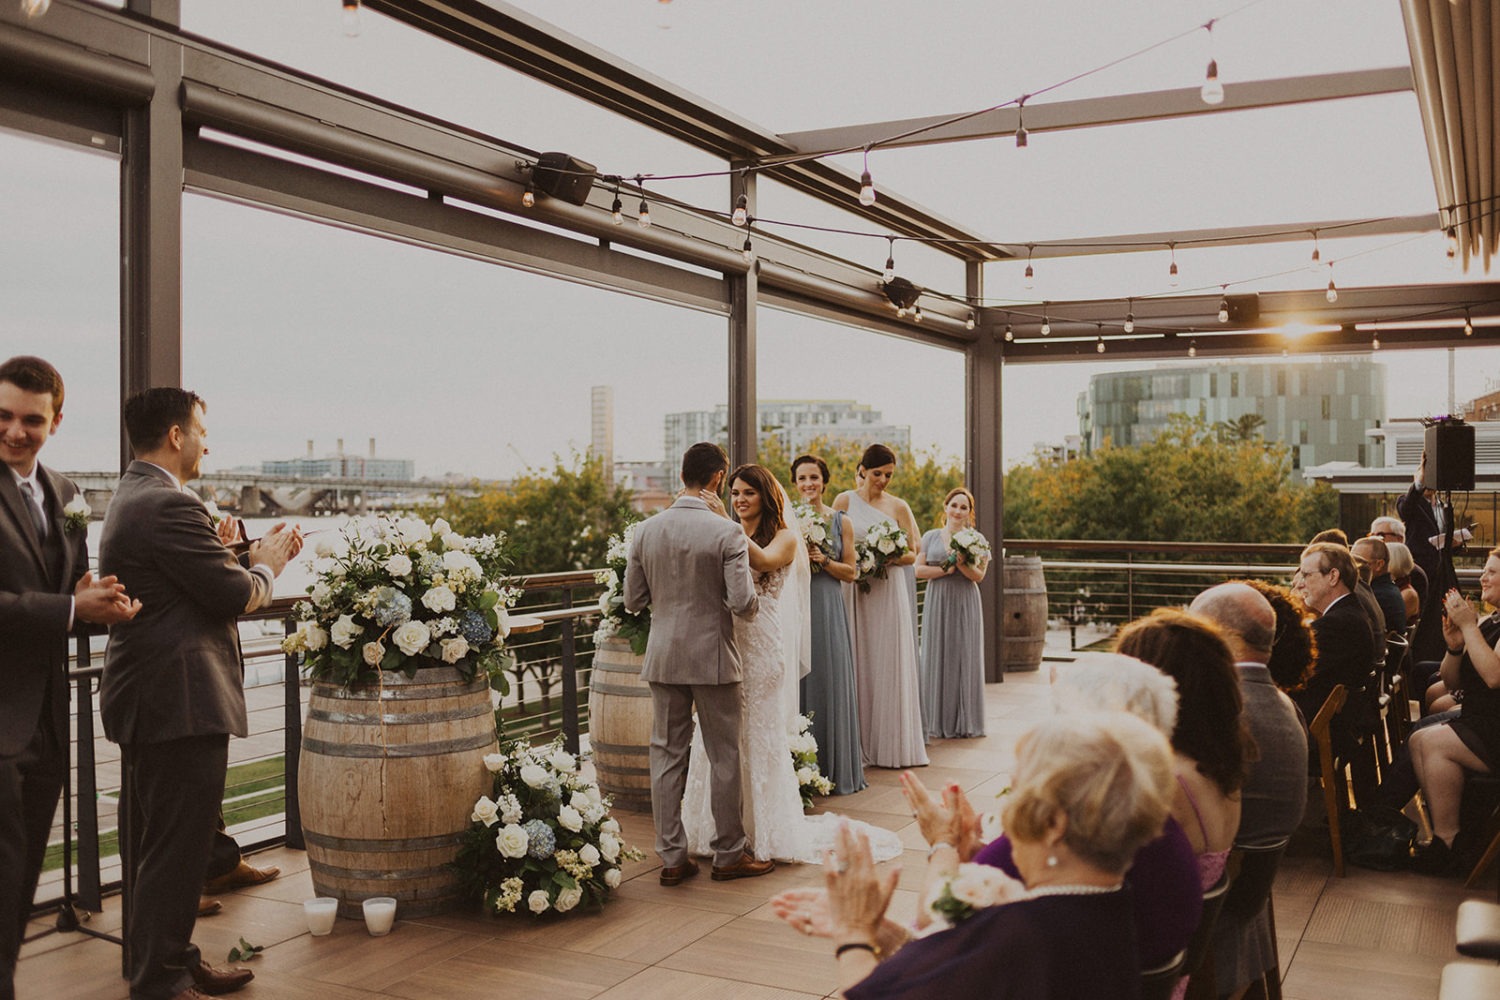 Couple embraces at rooftop wedding ceremony